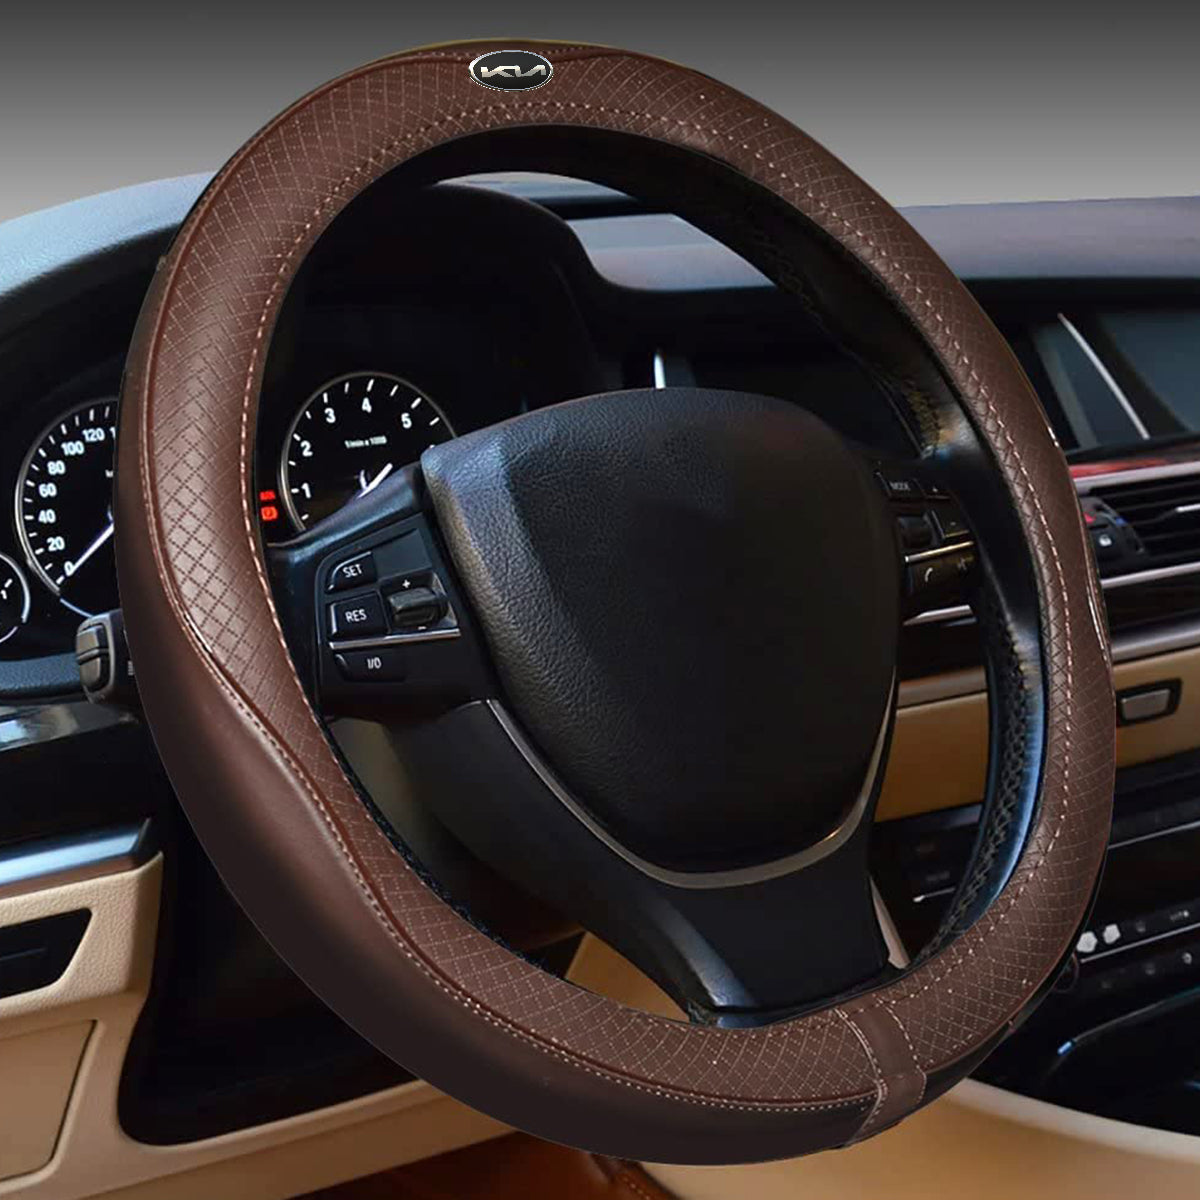 Car Steering Wheel Cover, Custom For Your Cars, Anti-Slip, Safety, Soft, Breathable, Heavy Duty, Thick, Full Surround, Sports Style, Car Accessories UE18990